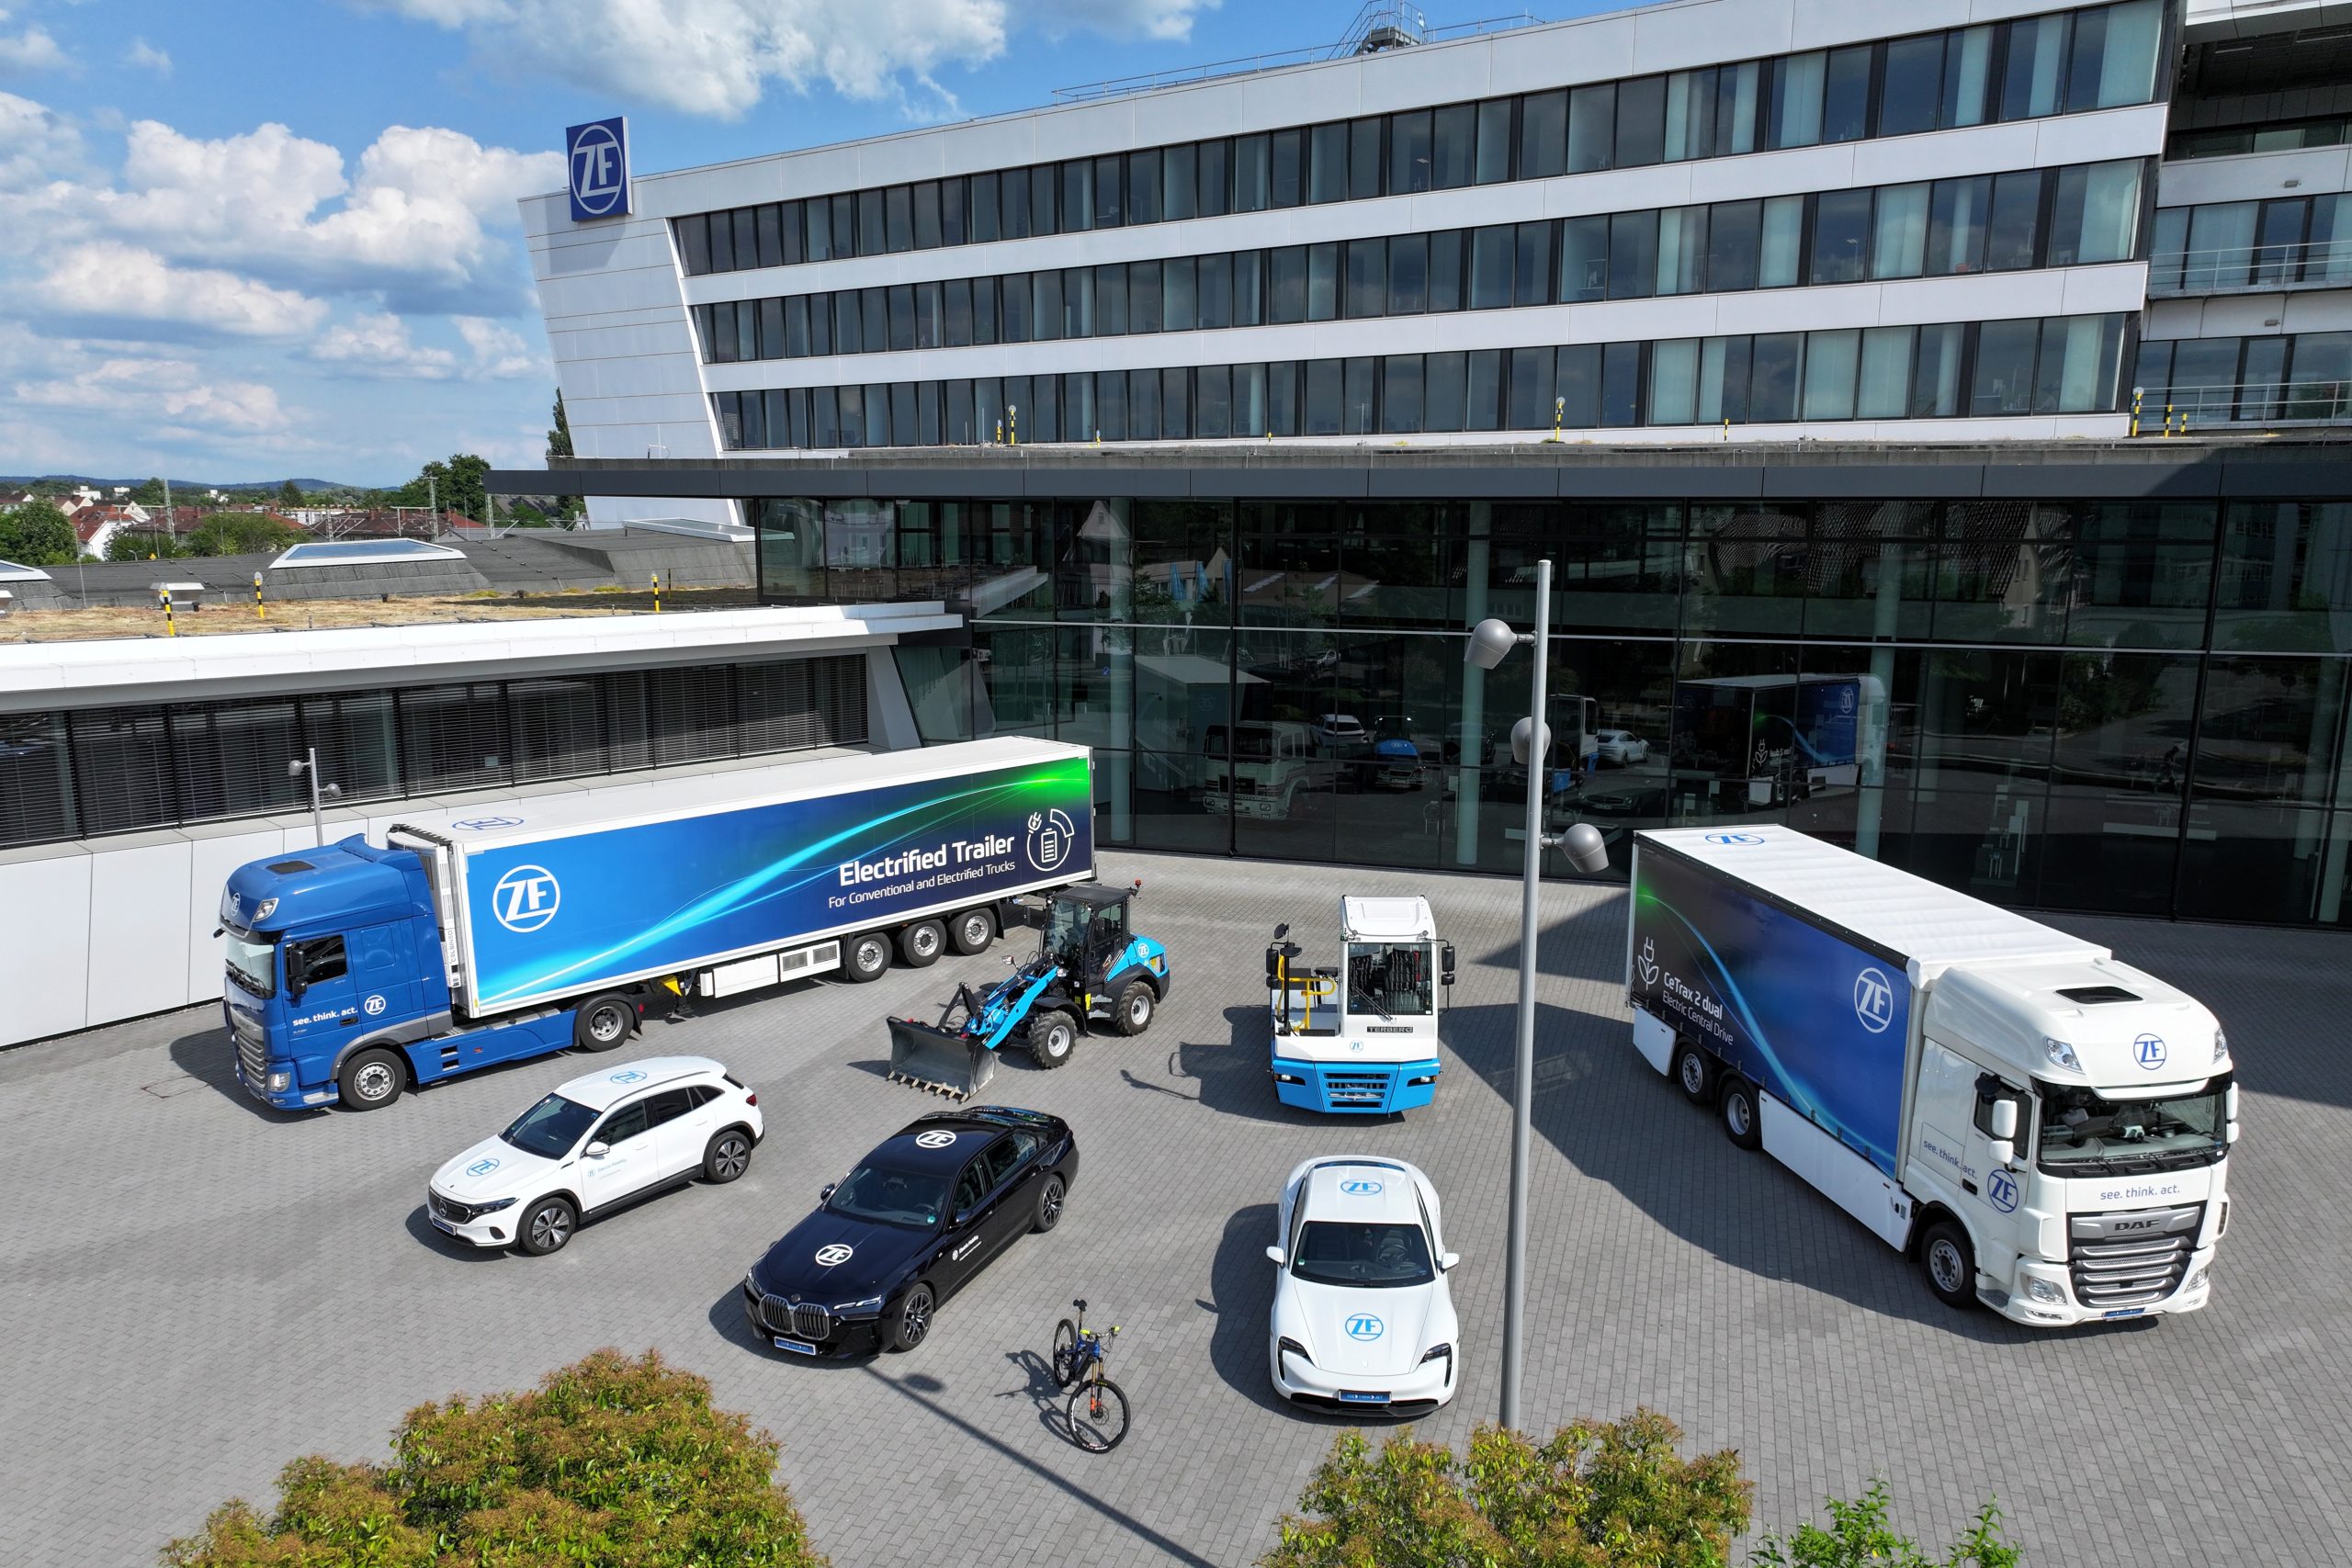 Smaller, lighter, more powerful: ZF presents new e-drives for passenger  cars and commercial vehicles - ZF